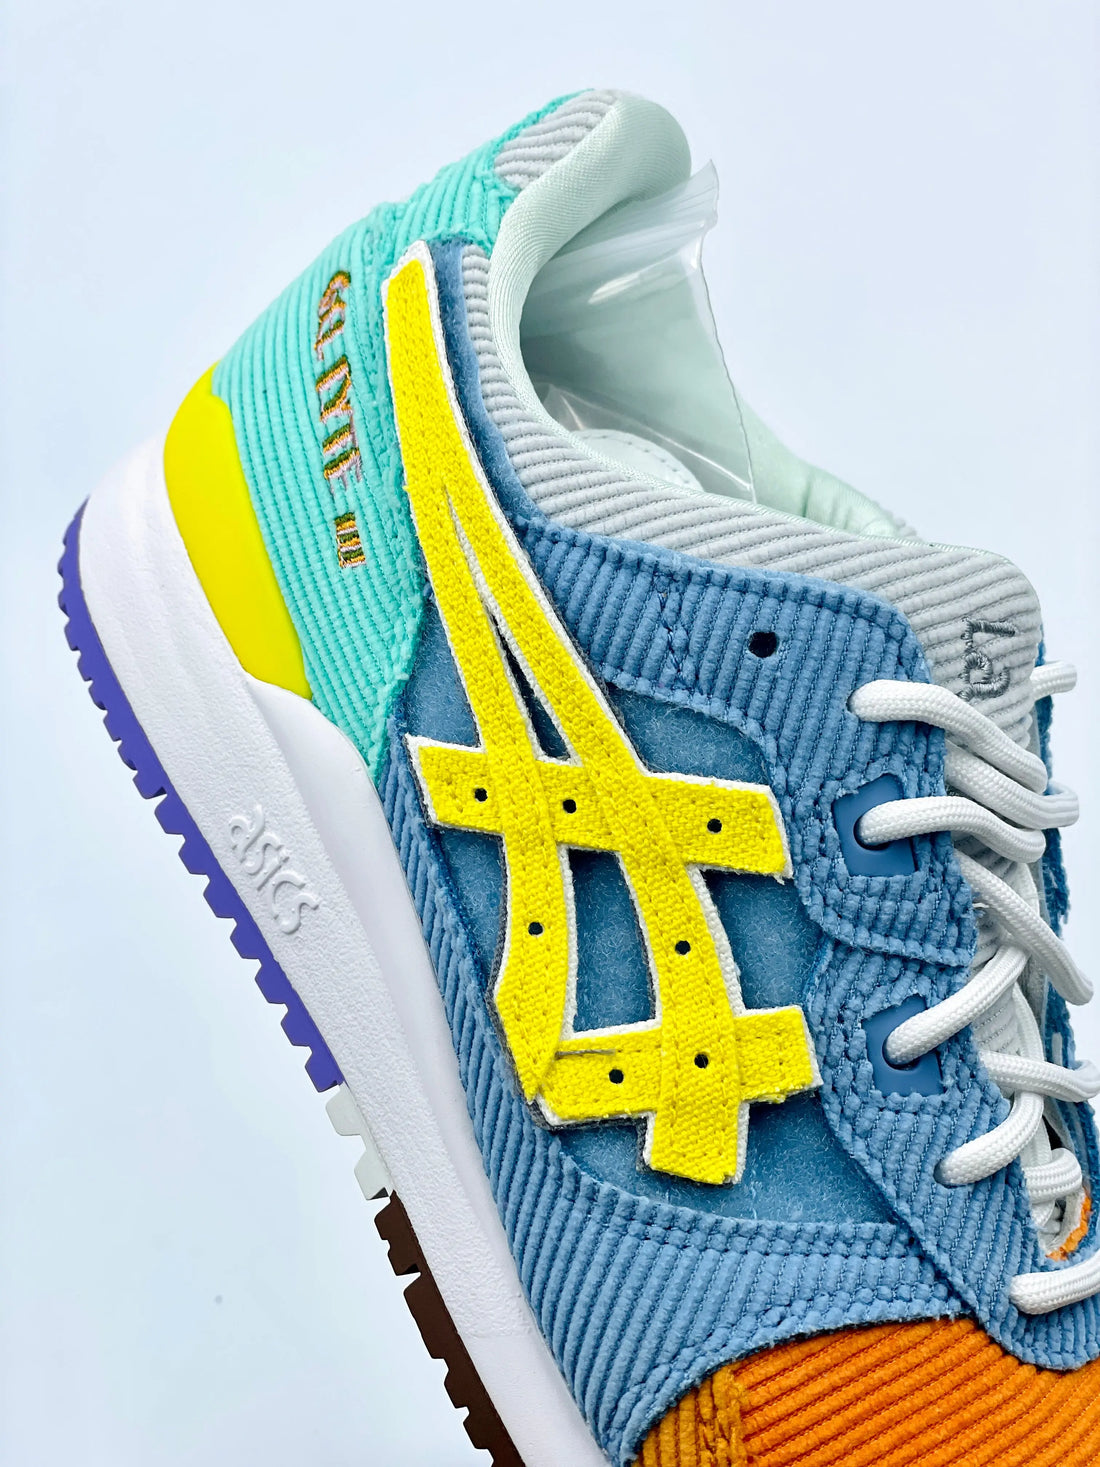 ASICS Gel-Lyte III Sean Wotherspoon x Atmos Product vendor